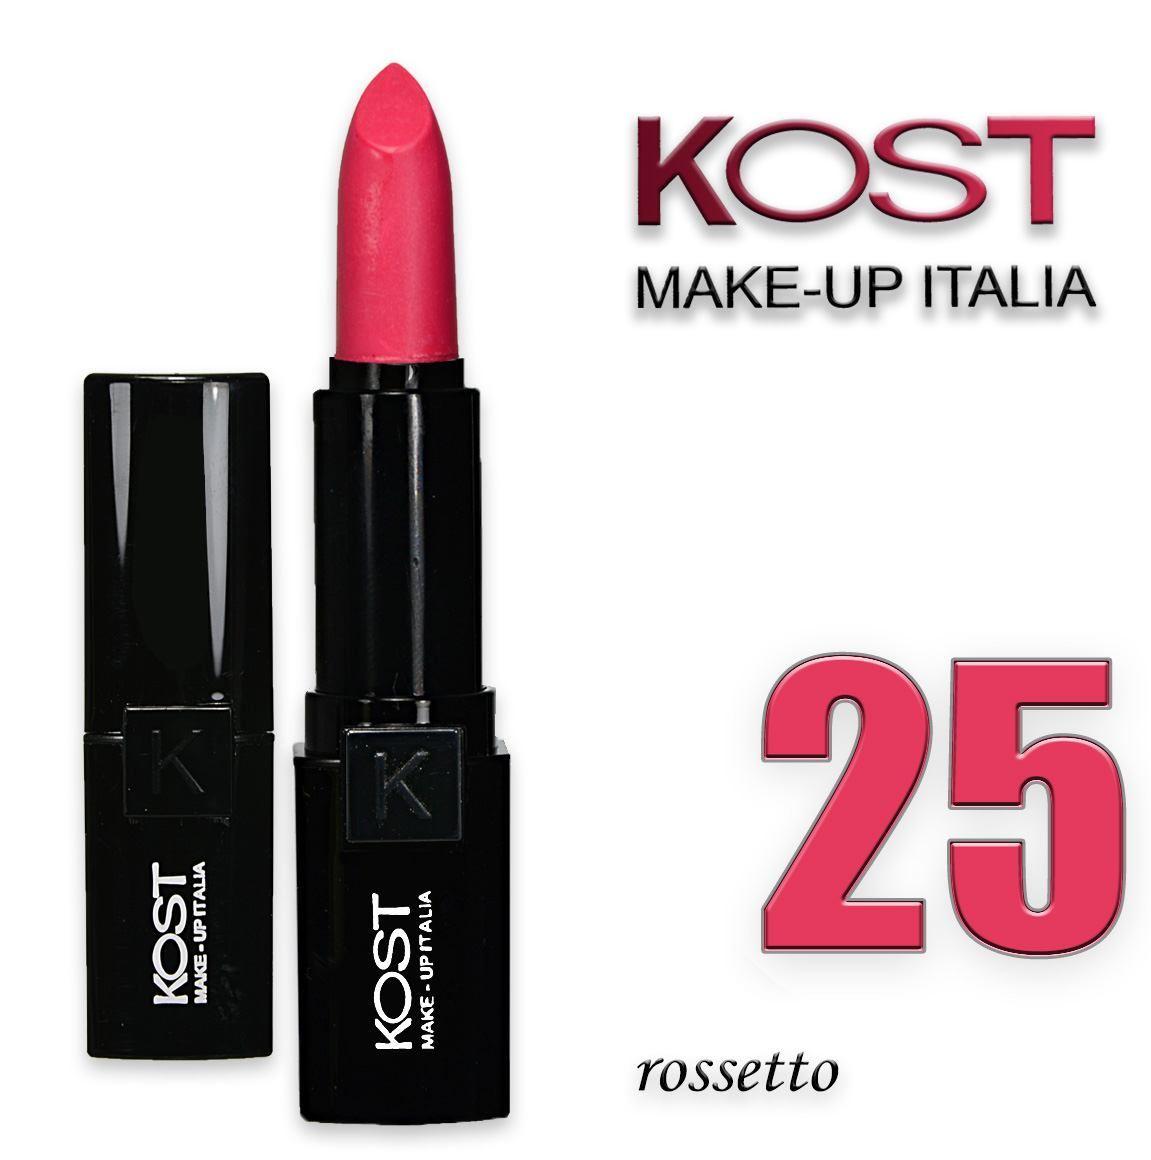 Rossetto kost 25